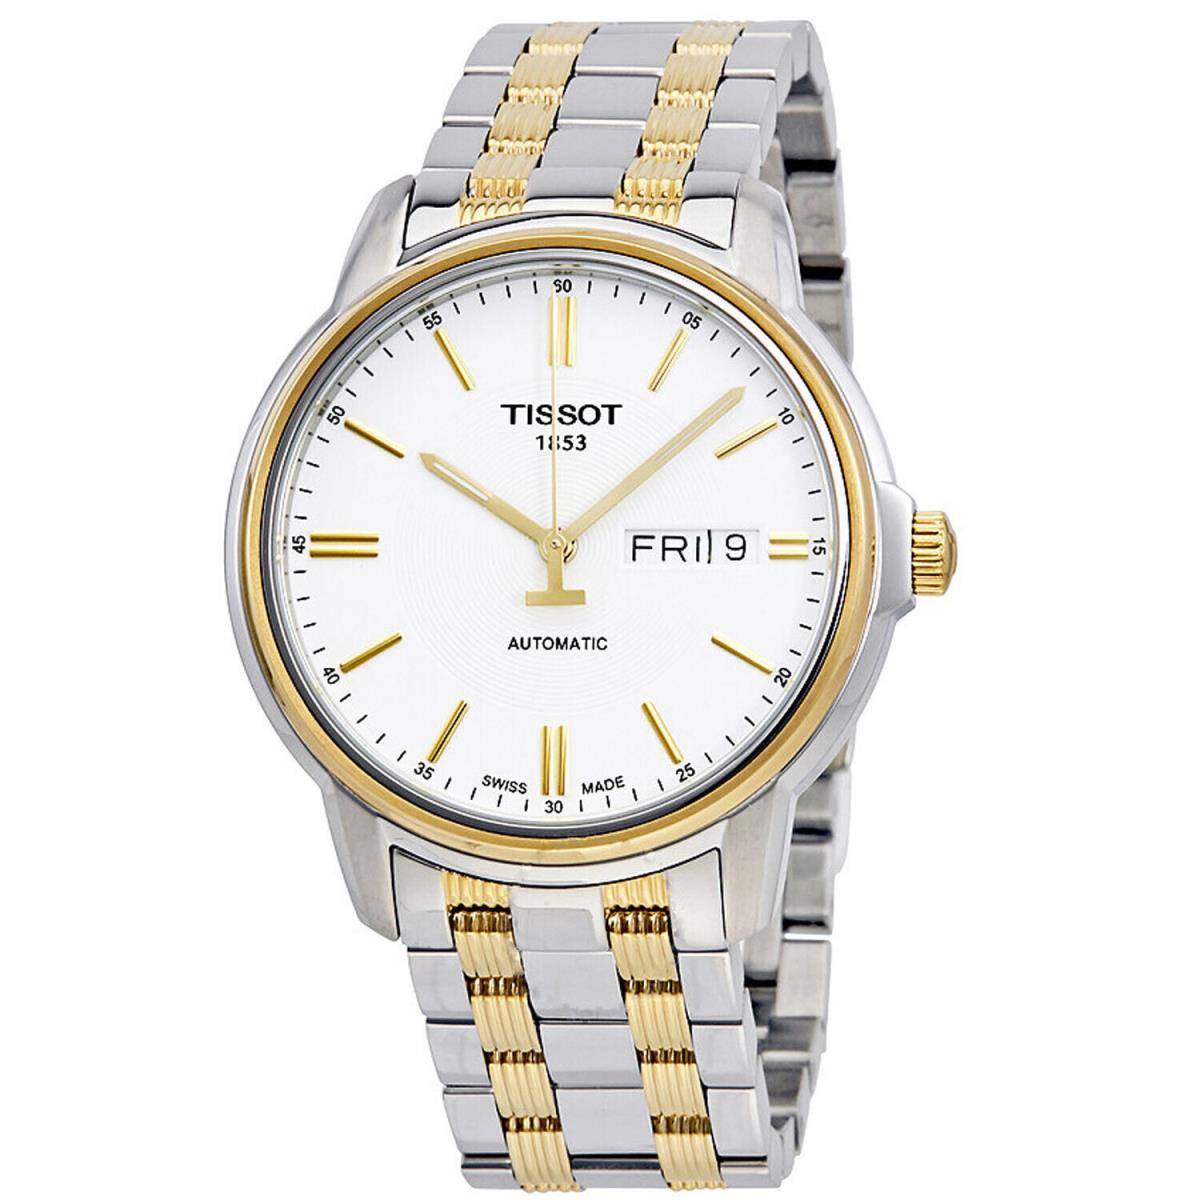 Tissot Men`s Automatic Iii White Dial Watch - T0654302203100